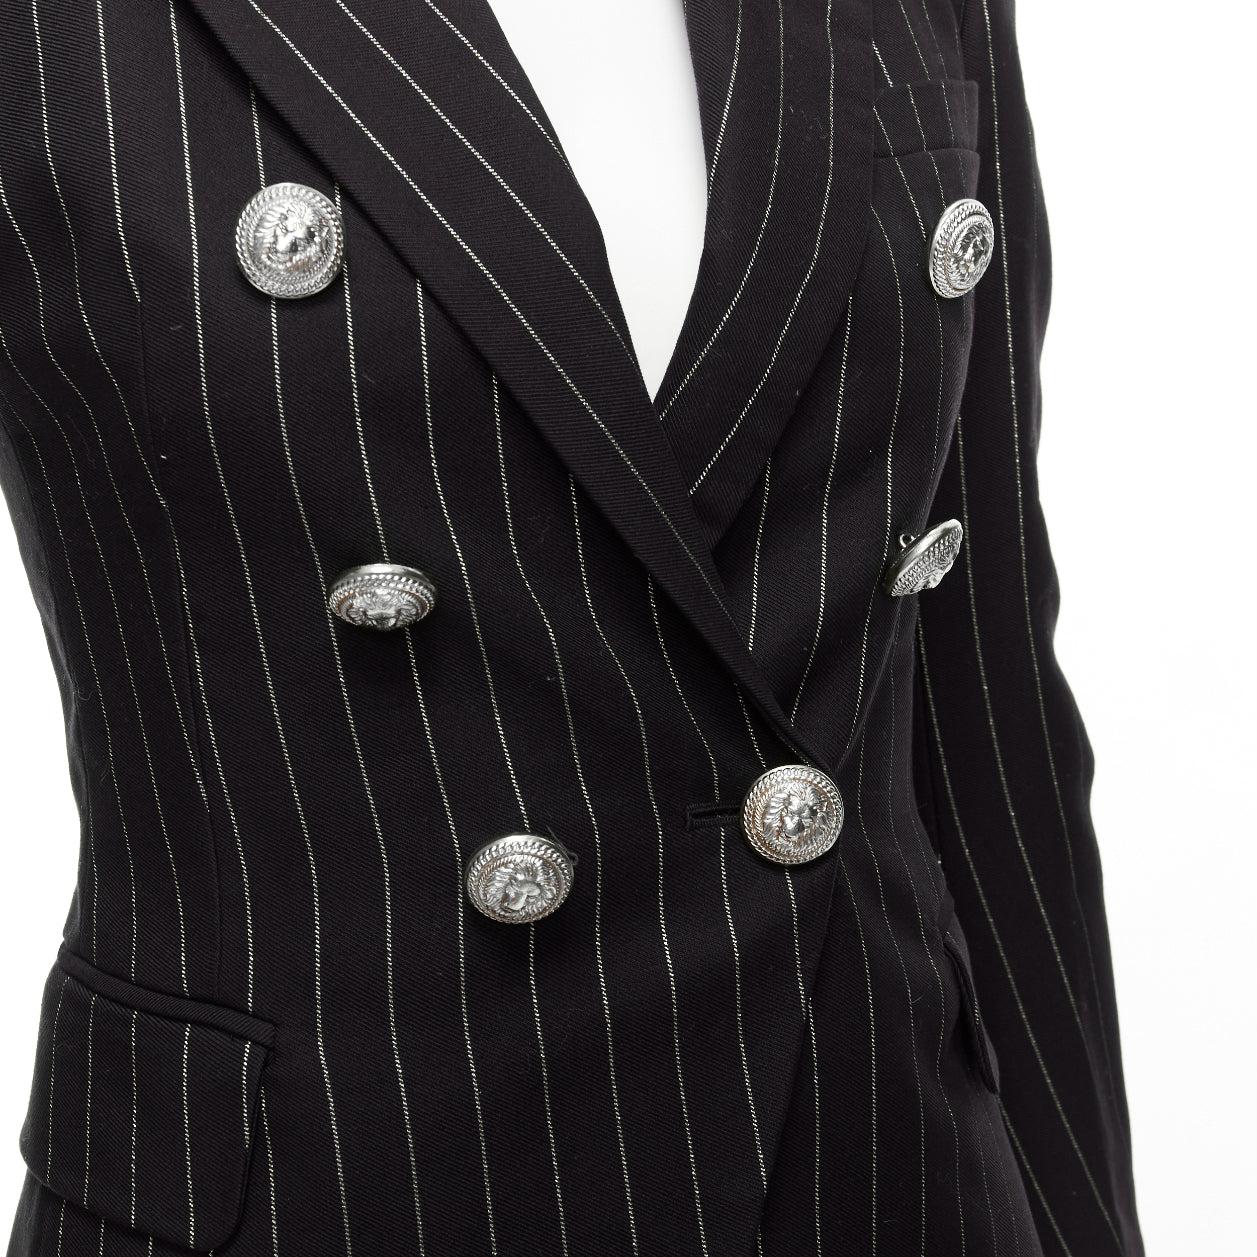 BALMAIN metallic gold striped black cotton blend double breasted blazer FR34 XS
Reference: AAWC/A00732
Brand: Balmain
Designer: Olivier Rousteing
Material: Cotton, Blend
Color: Black, Gold
Pattern: Striped
Closure: Button
Lining: Black Fabric
Extra